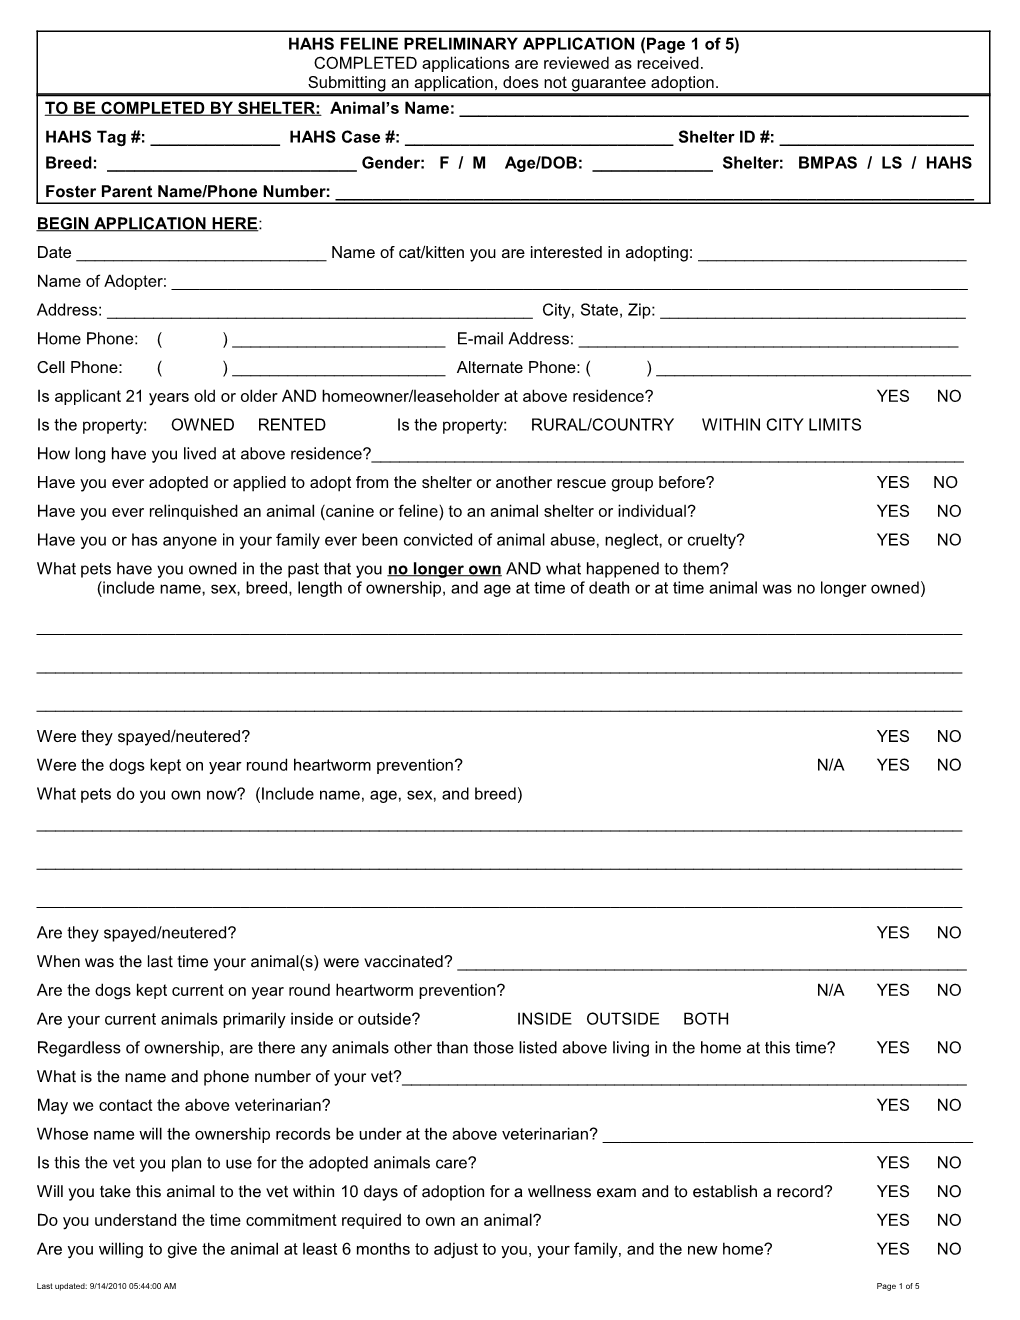 HAHS FELINE PRELIMINARY APPLICATION (Page 1 of 4)